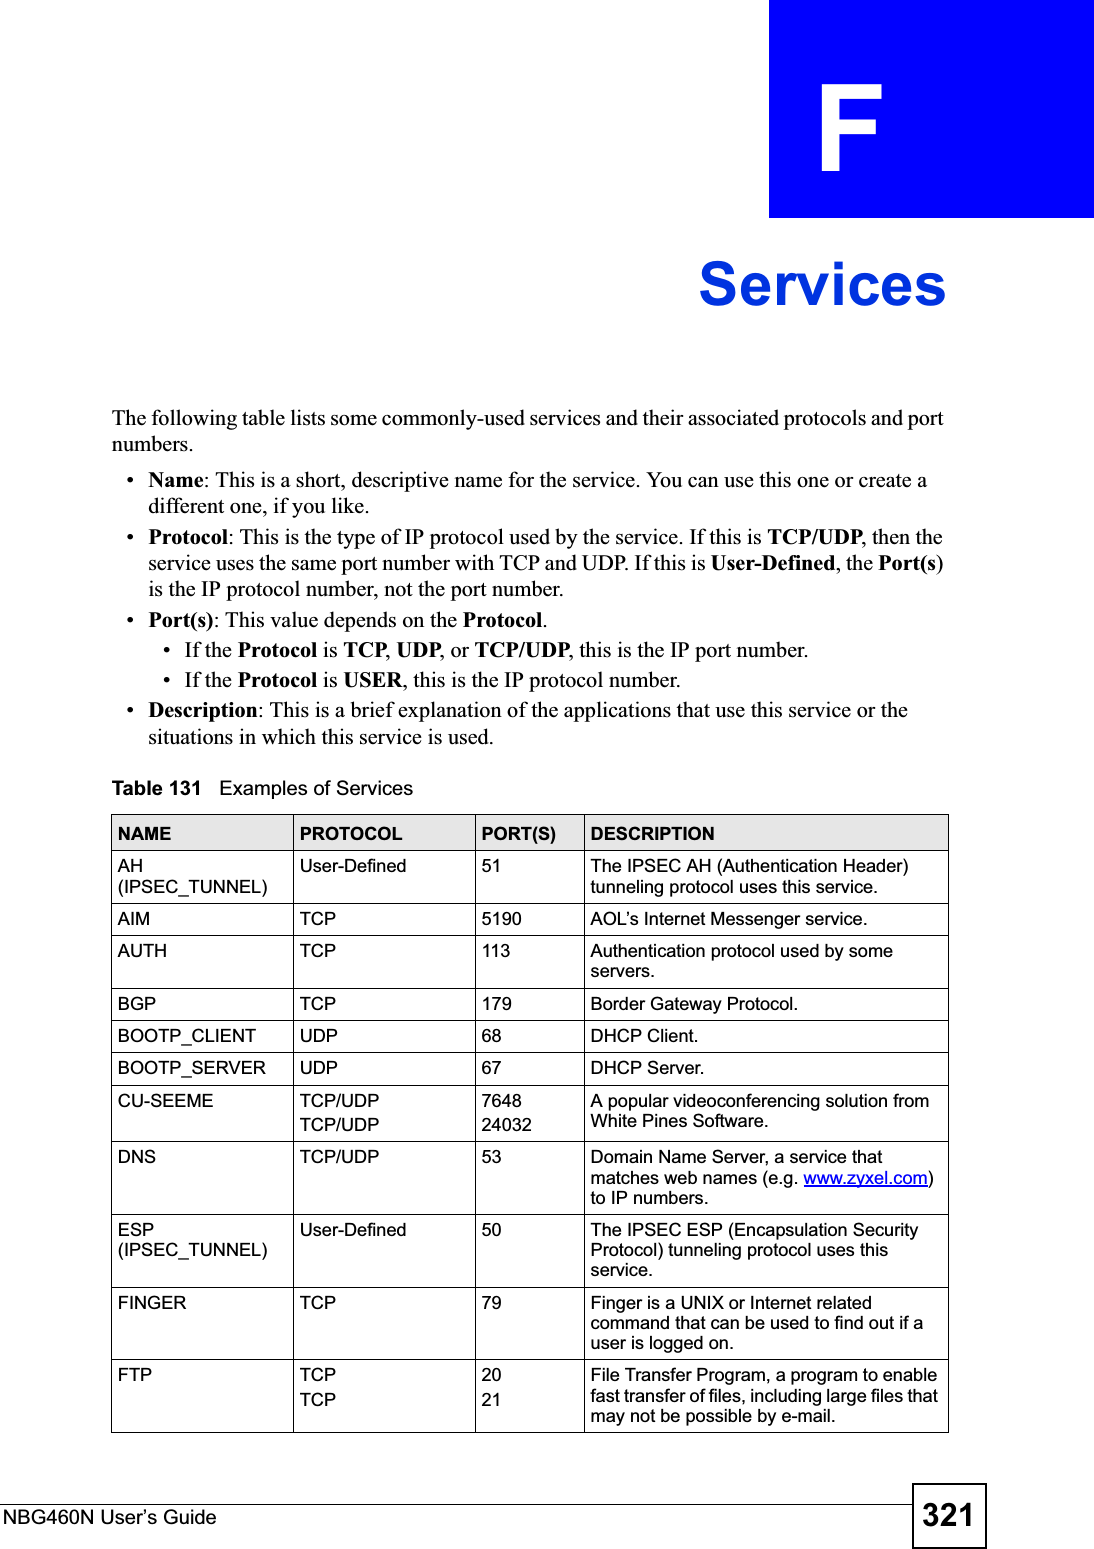 NBG460N User’s Guide 321APPENDIX  F ServicesThe following table lists some commonly-used services and their associated protocols and port numbers.•Name: This is a short, descriptive name for the service. You can use this one or create a different one, if you like.•Protocol: This is the type of IP protocol used by the service. If this is TCP/UDP, then the service uses the same port number with TCP and UDP. If this is User-Defined, the Port(s)is the IP protocol number, not the port number.•Port(s): This value depends on the Protocol.• If the Protocol is TCP,UDP, or TCP/UDP, this is the IP port number.• If the Protocol is USER, this is the IP protocol number.•Description: This is a brief explanation of the applications that use this service or the situations in which this service is used.Table 131   Examples of ServicesNAME PROTOCOL PORT(S) DESCRIPTIONAH(IPSEC_TUNNEL)User-Defined 51 The IPSEC AH (Authentication Header) tunneling protocol uses this service.AIM TCP 5190 AOL’s Internet Messenger service.AUTH TCP 113 Authentication protocol used by some servers.BGP TCP 179 Border Gateway Protocol.BOOTP_CLIENT UDP 68 DHCP Client.BOOTP_SERVER UDP 67 DHCP Server.CU-SEEME TCP/UDPTCP/UDP 764824032A popular videoconferencing solution from White Pines Software.DNS TCP/UDP 53 Domain Name Server, a service that matches web names (e.g. www.zyxel.com)to IP numbers.ESP(IPSEC_TUNNEL)User-Defined 50 The IPSEC ESP (Encapsulation Security Protocol) tunneling protocol uses this service.FINGER TCP 79 Finger is a UNIX or Internet related command that can be used to find out if a user is logged on.FTP TCPTCP2021File Transfer Program, a program to enable fast transfer of files, including large files that may not be possible by e-mail.